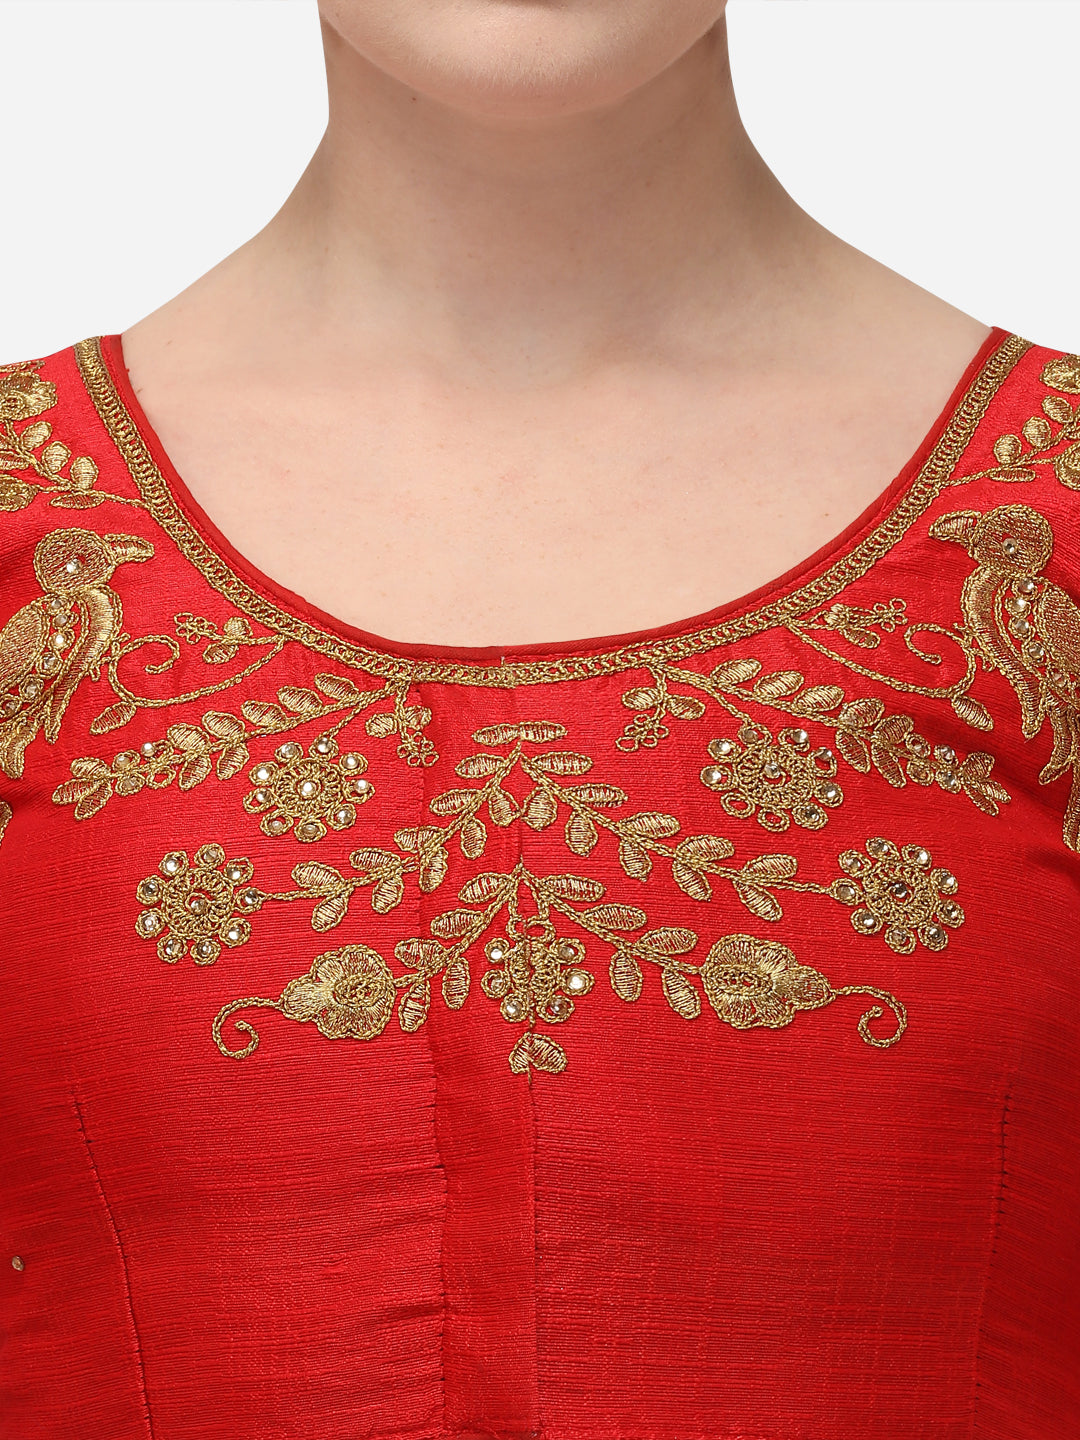 Birds Design Red Color Embroidered Blouse